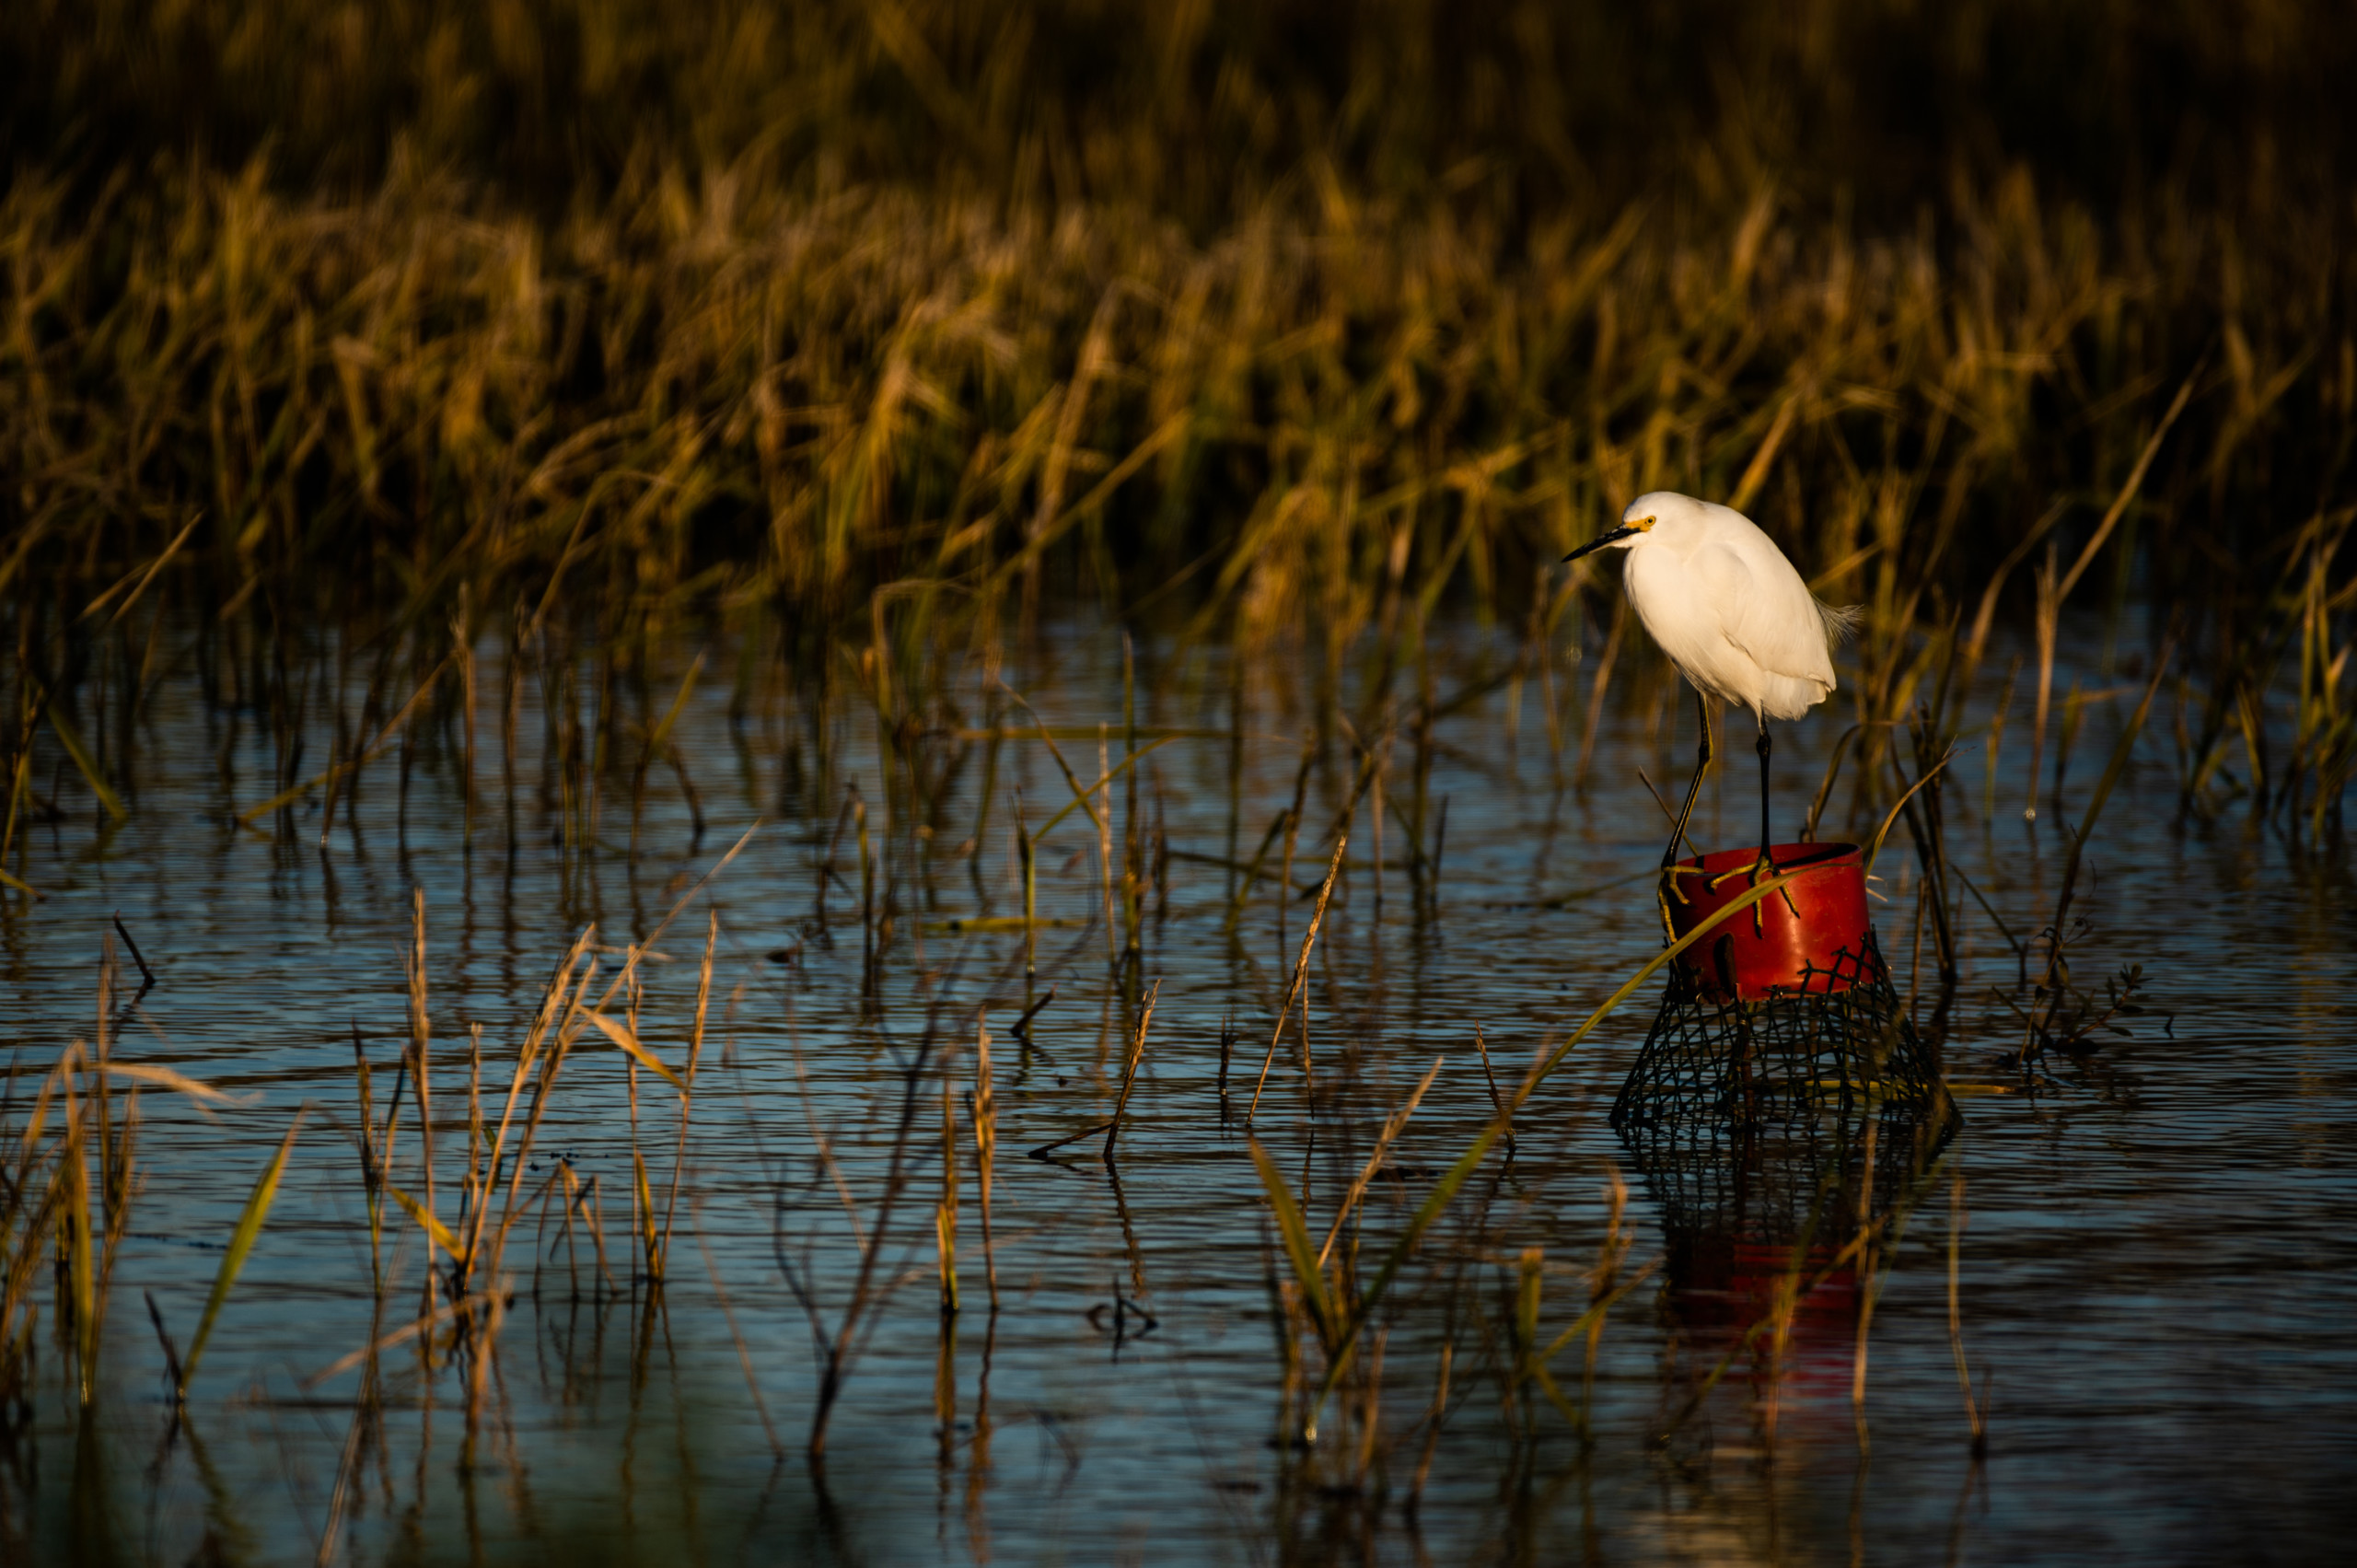 A white heron watches over flooded rice fields from the top of a crawfish trap